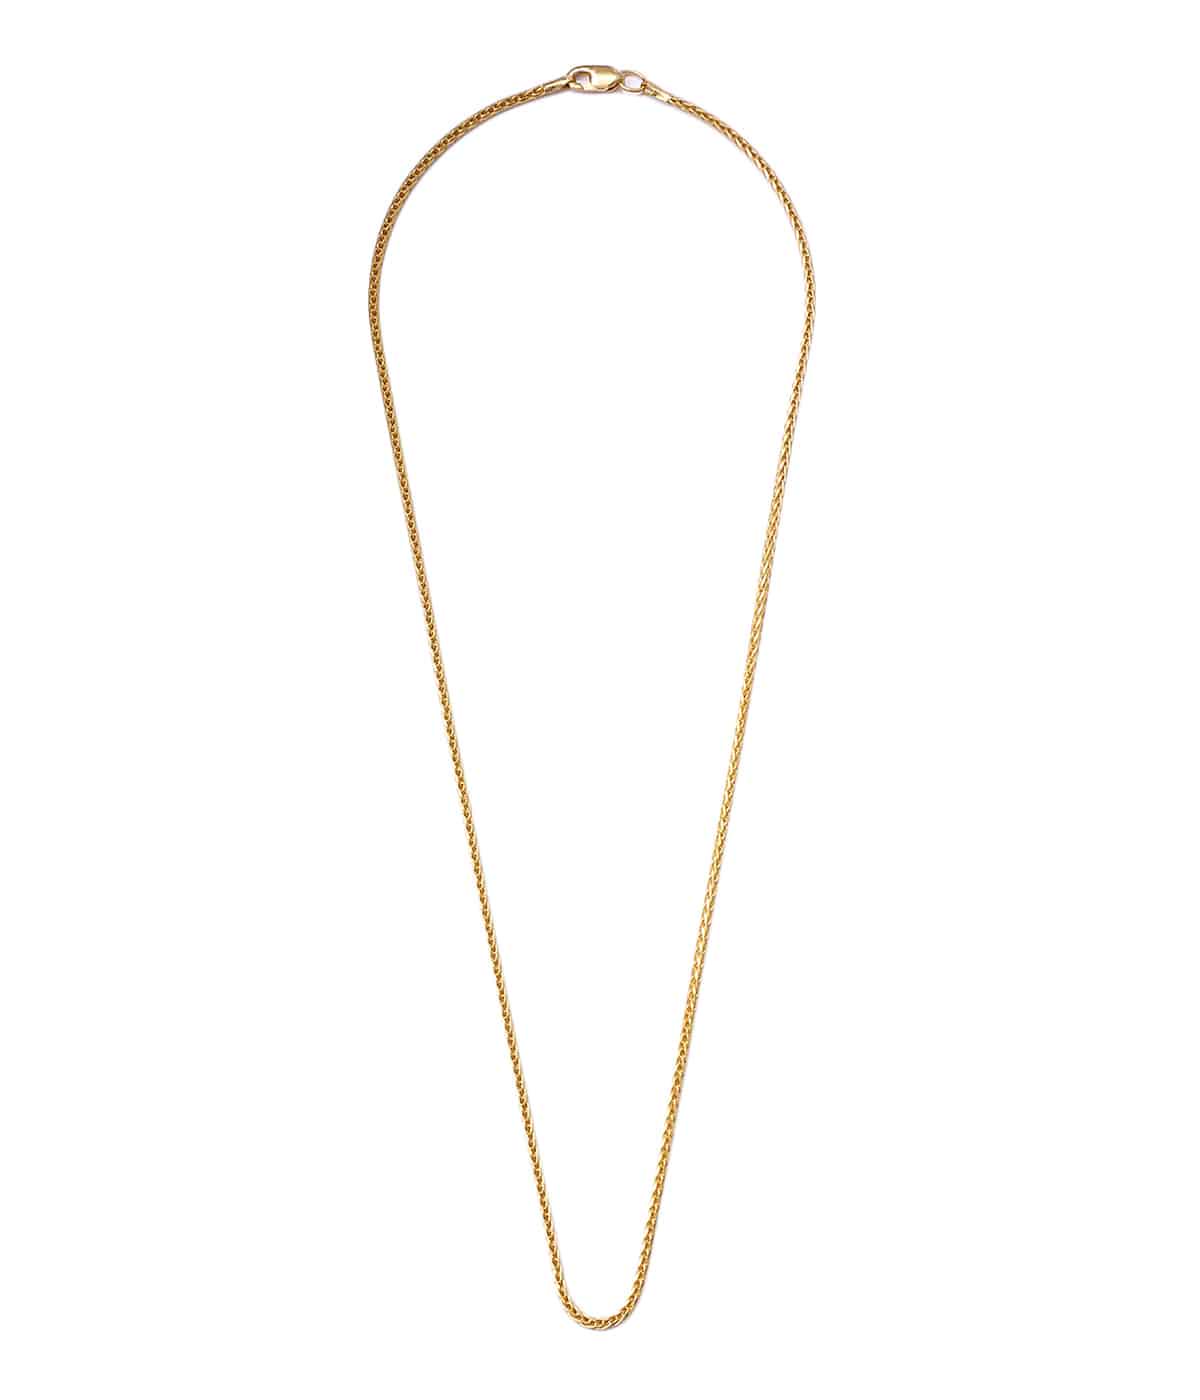 CHAIN NECKLACE GOLD PLATED 40cm - EP040 -